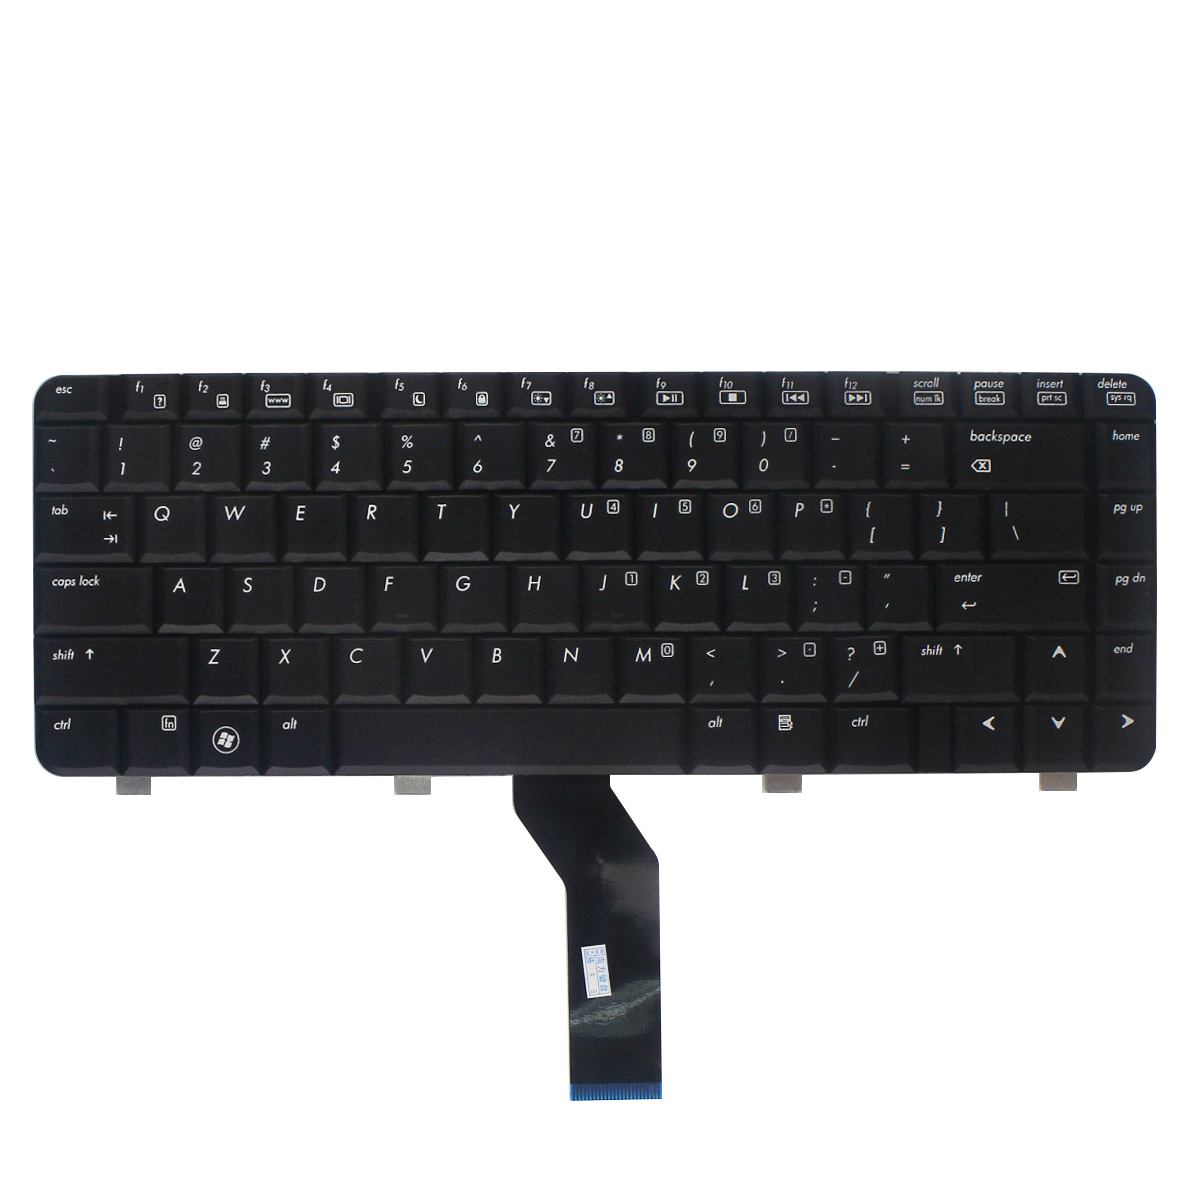 New Keyboard for HP Compaq 6520 6520P 6520S 6720 6720S Laptop 4